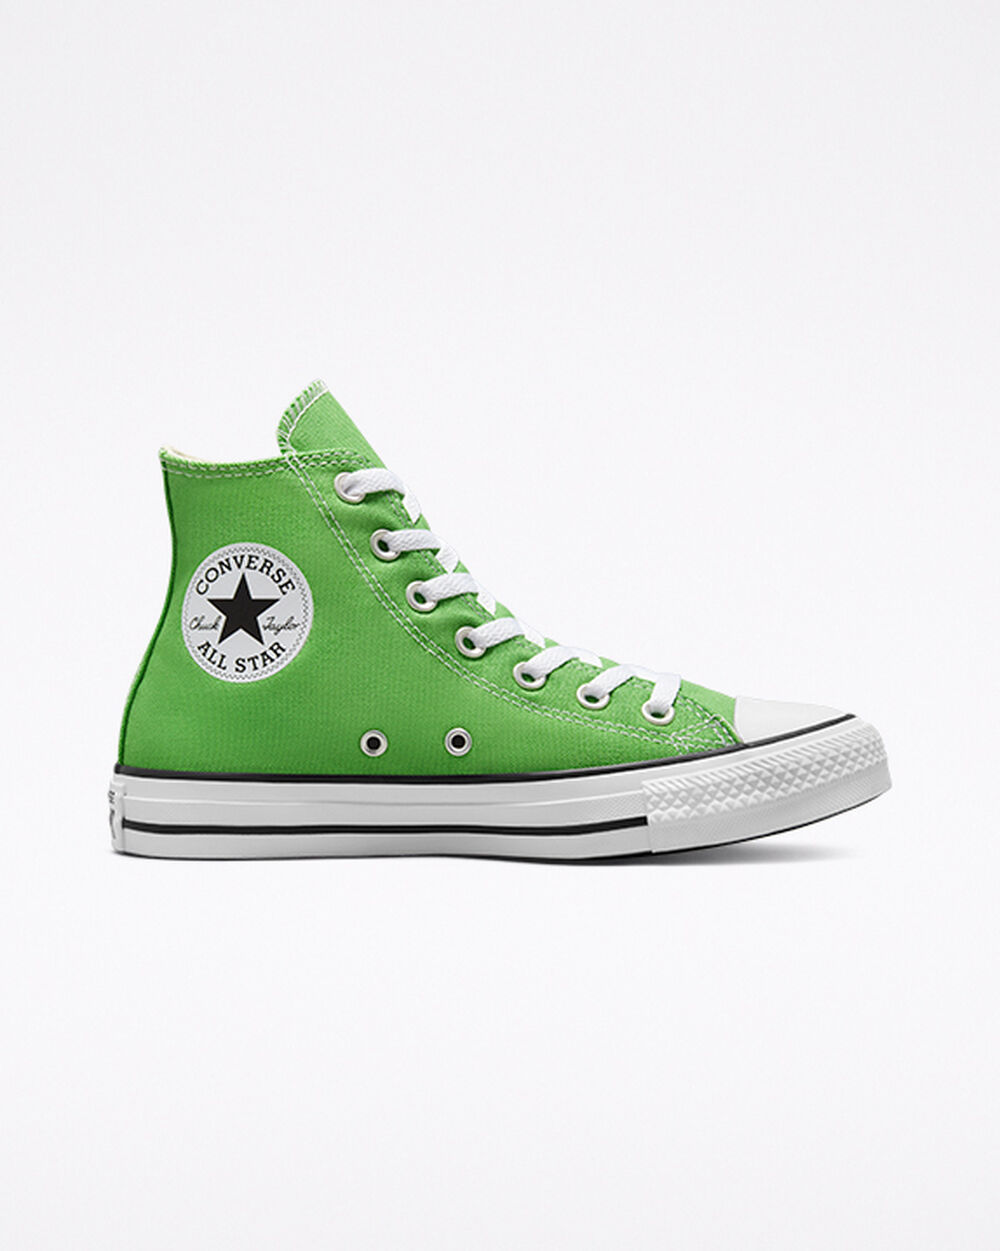 Tenis Converse Chuck Taylor All Star Mujer Verdes | Mexico-741266